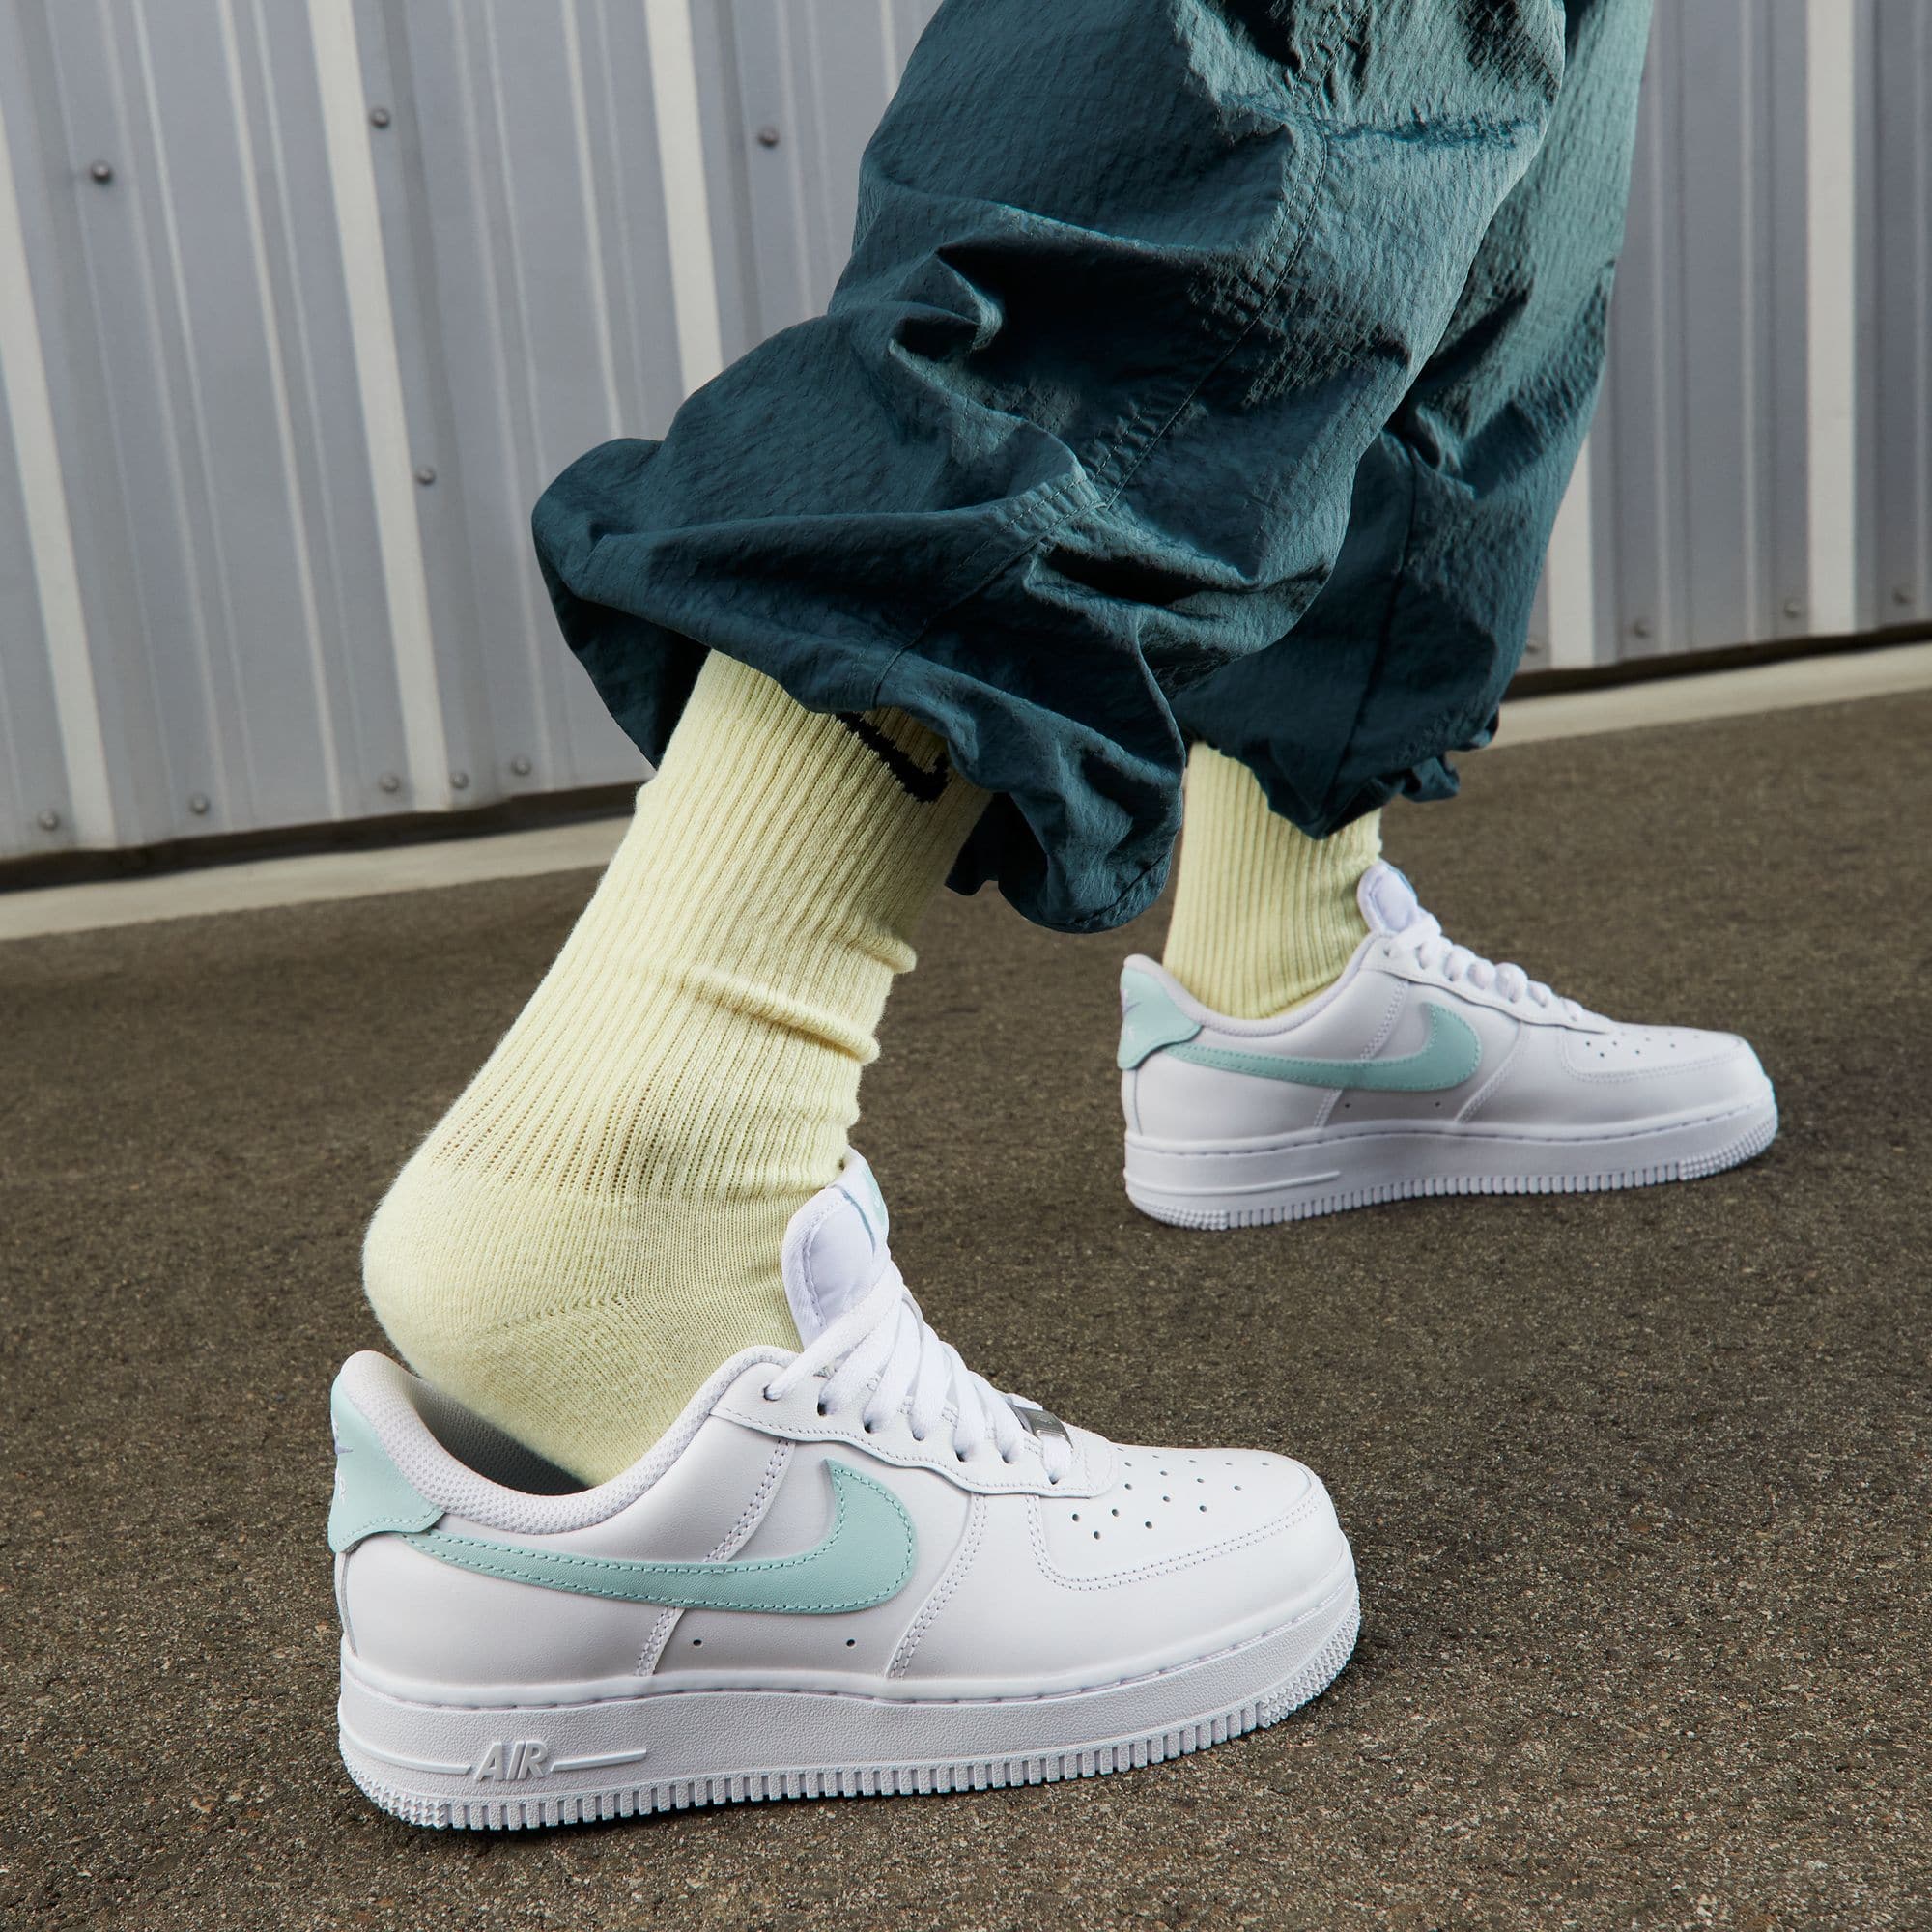 GIÀY NIKE NỮ AIR FORCE 1 07 EASYON WHITE ICE JADE WOMENS SHOES DX5883-101 5